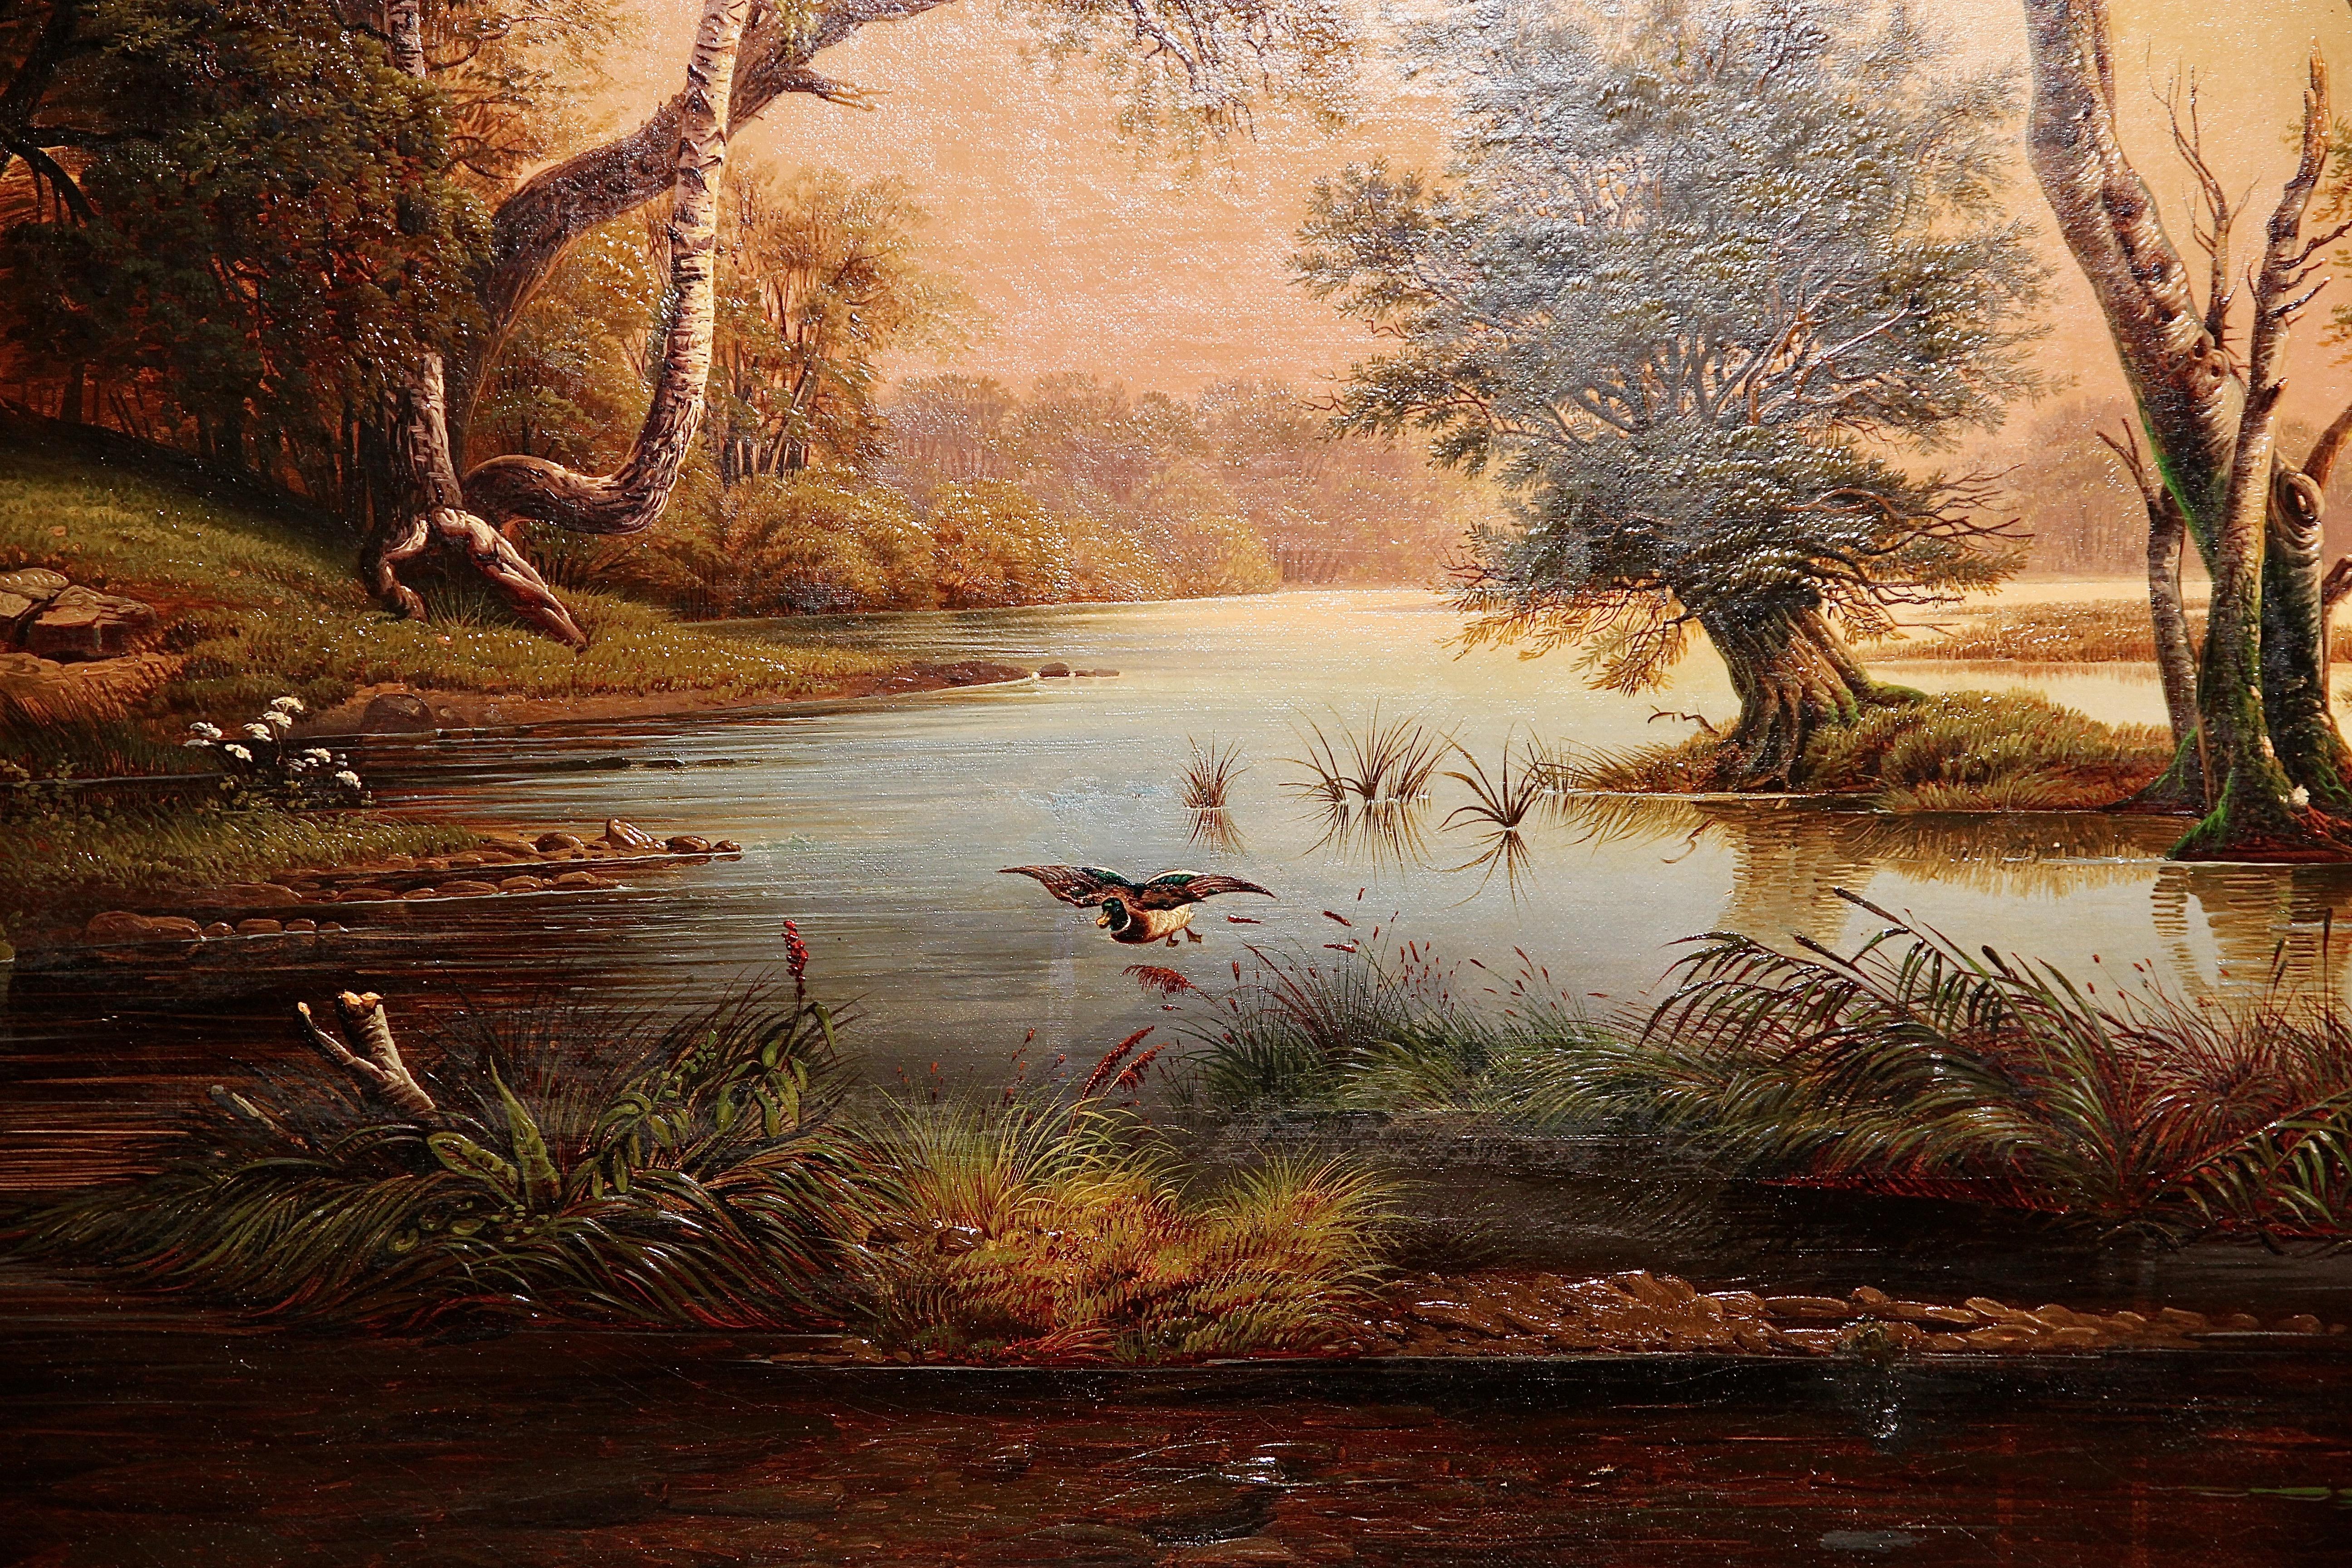 Tropical river landscape in sunset glow, signed, dated, Joseph Firmenich 1868, oil on canvas.

Very decorative and large painting. Canvas has been restored in several places.

New frame in antique style.
Dimensions without frame: 100 cm x 142